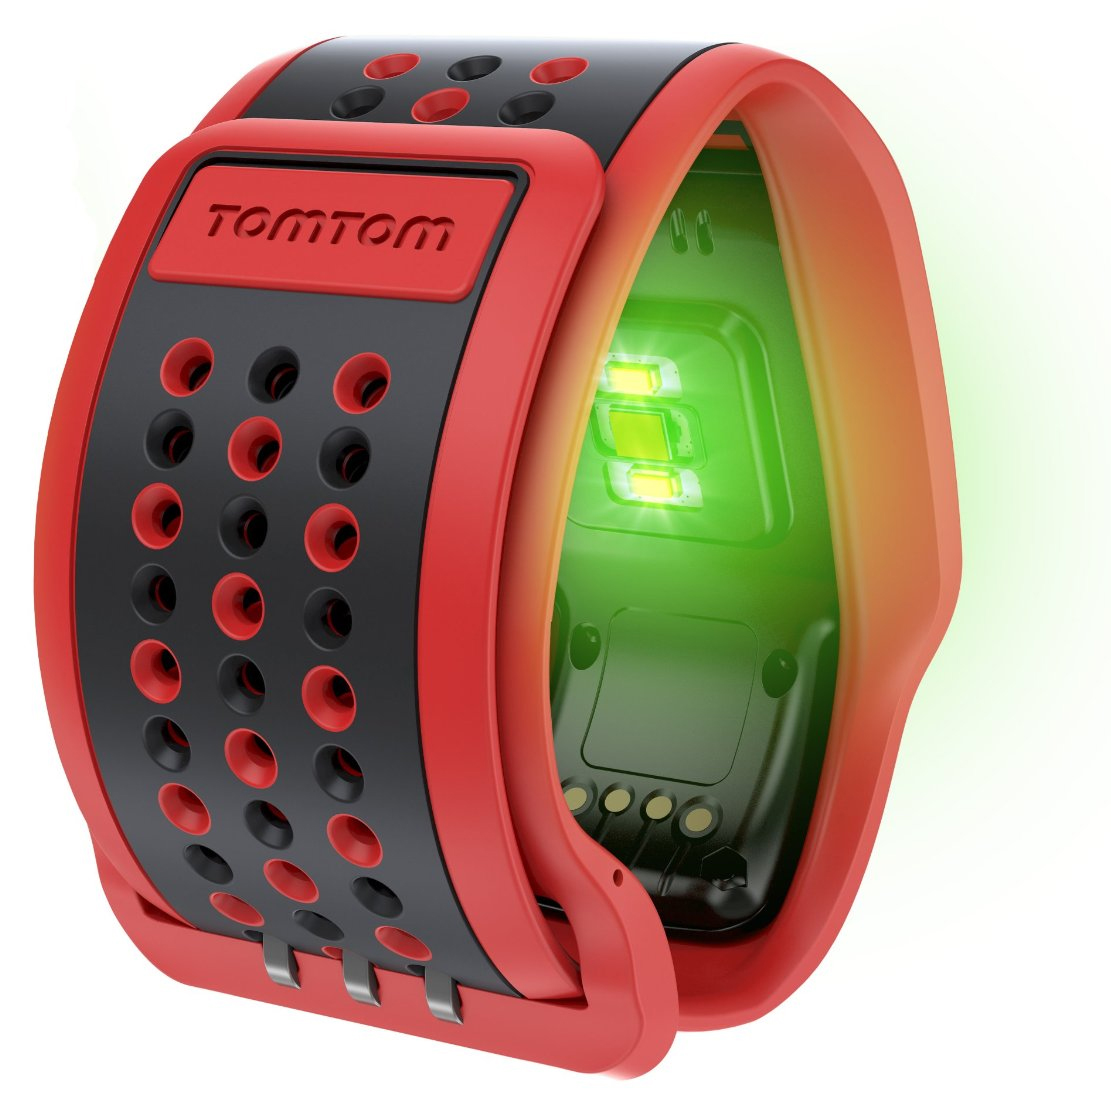 TomTom’s flashy built in Heart rate monitor